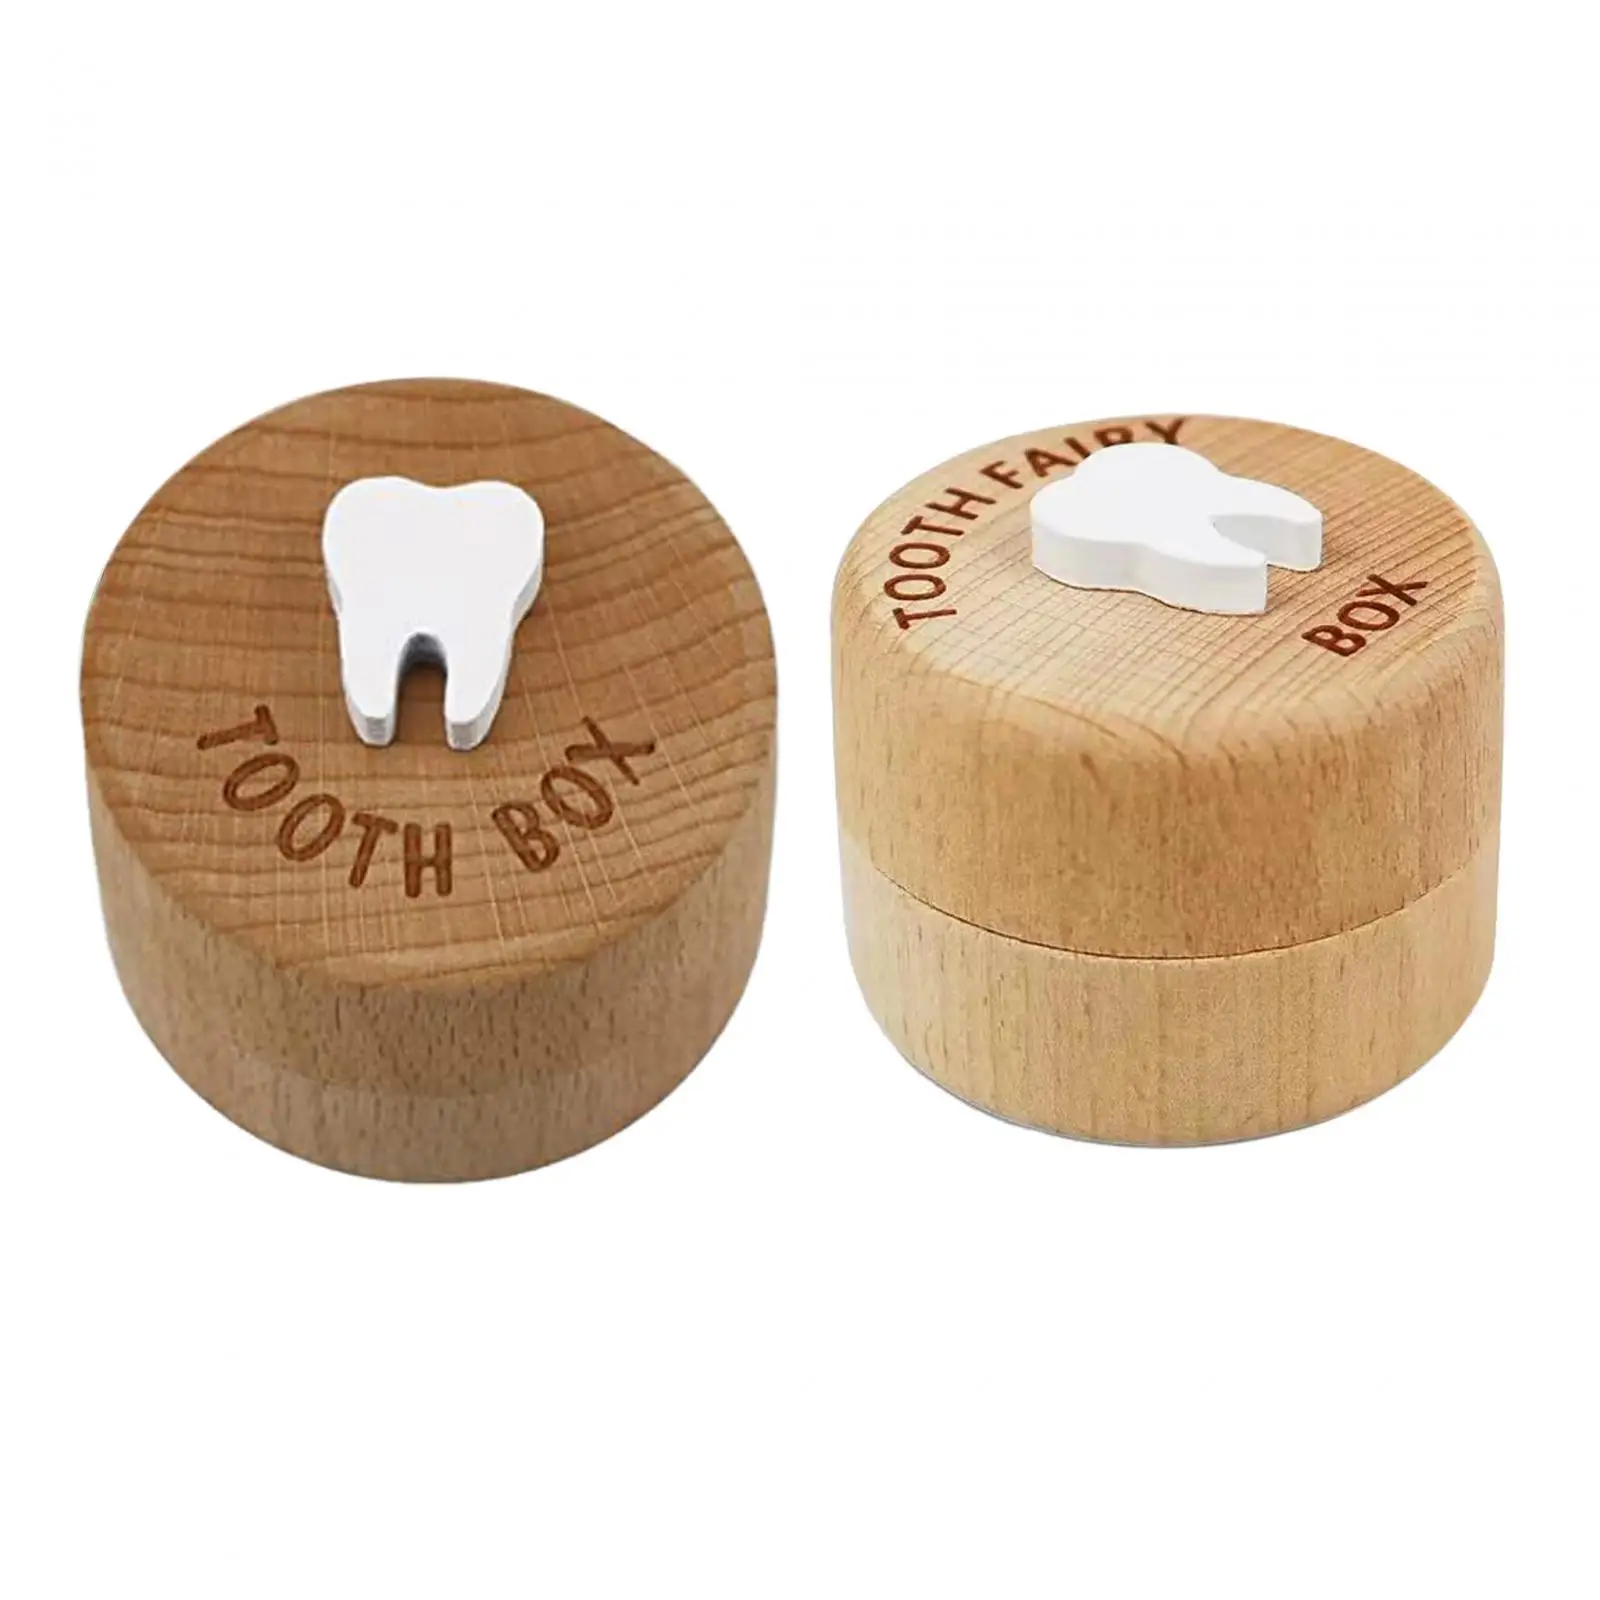 Wooden Baby Tooth Box Multipurpose Collection Box Fetal Hair Box First Tooth Keepsake Box for Birthday Gift Baby Shower Baby